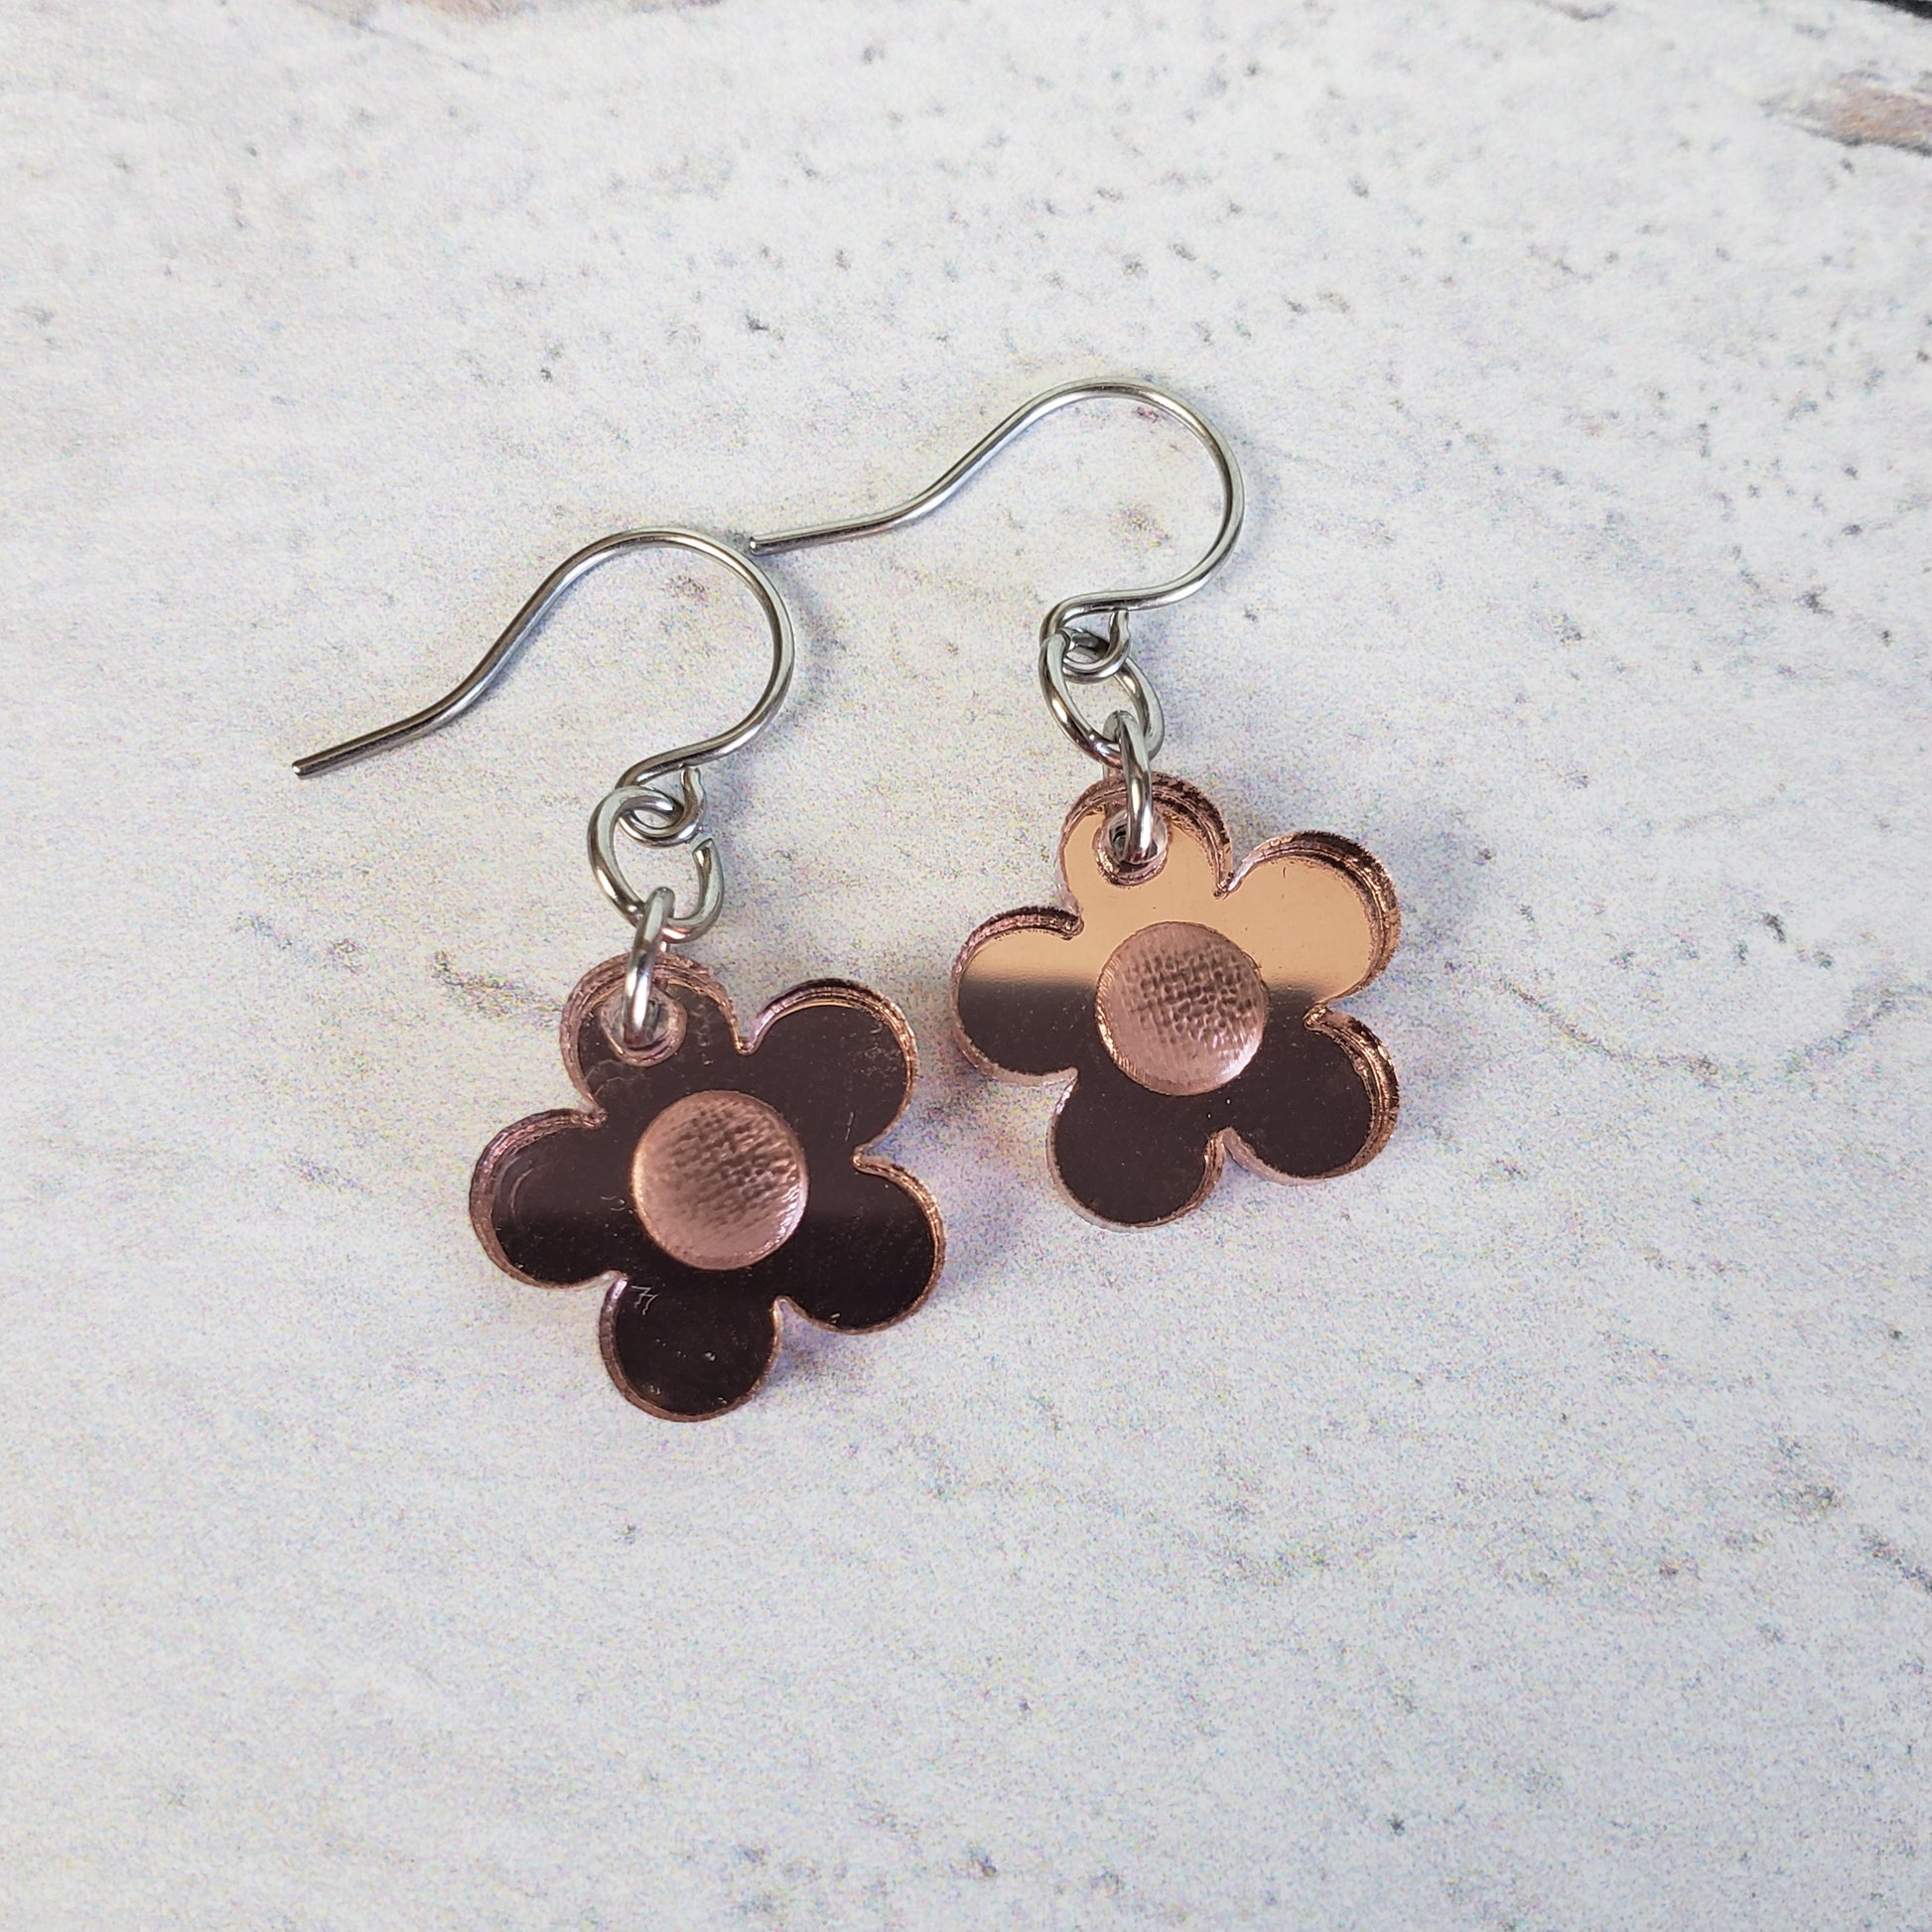 Small rose gold mirror acrylic daisy earrings on small stainless steel wires.